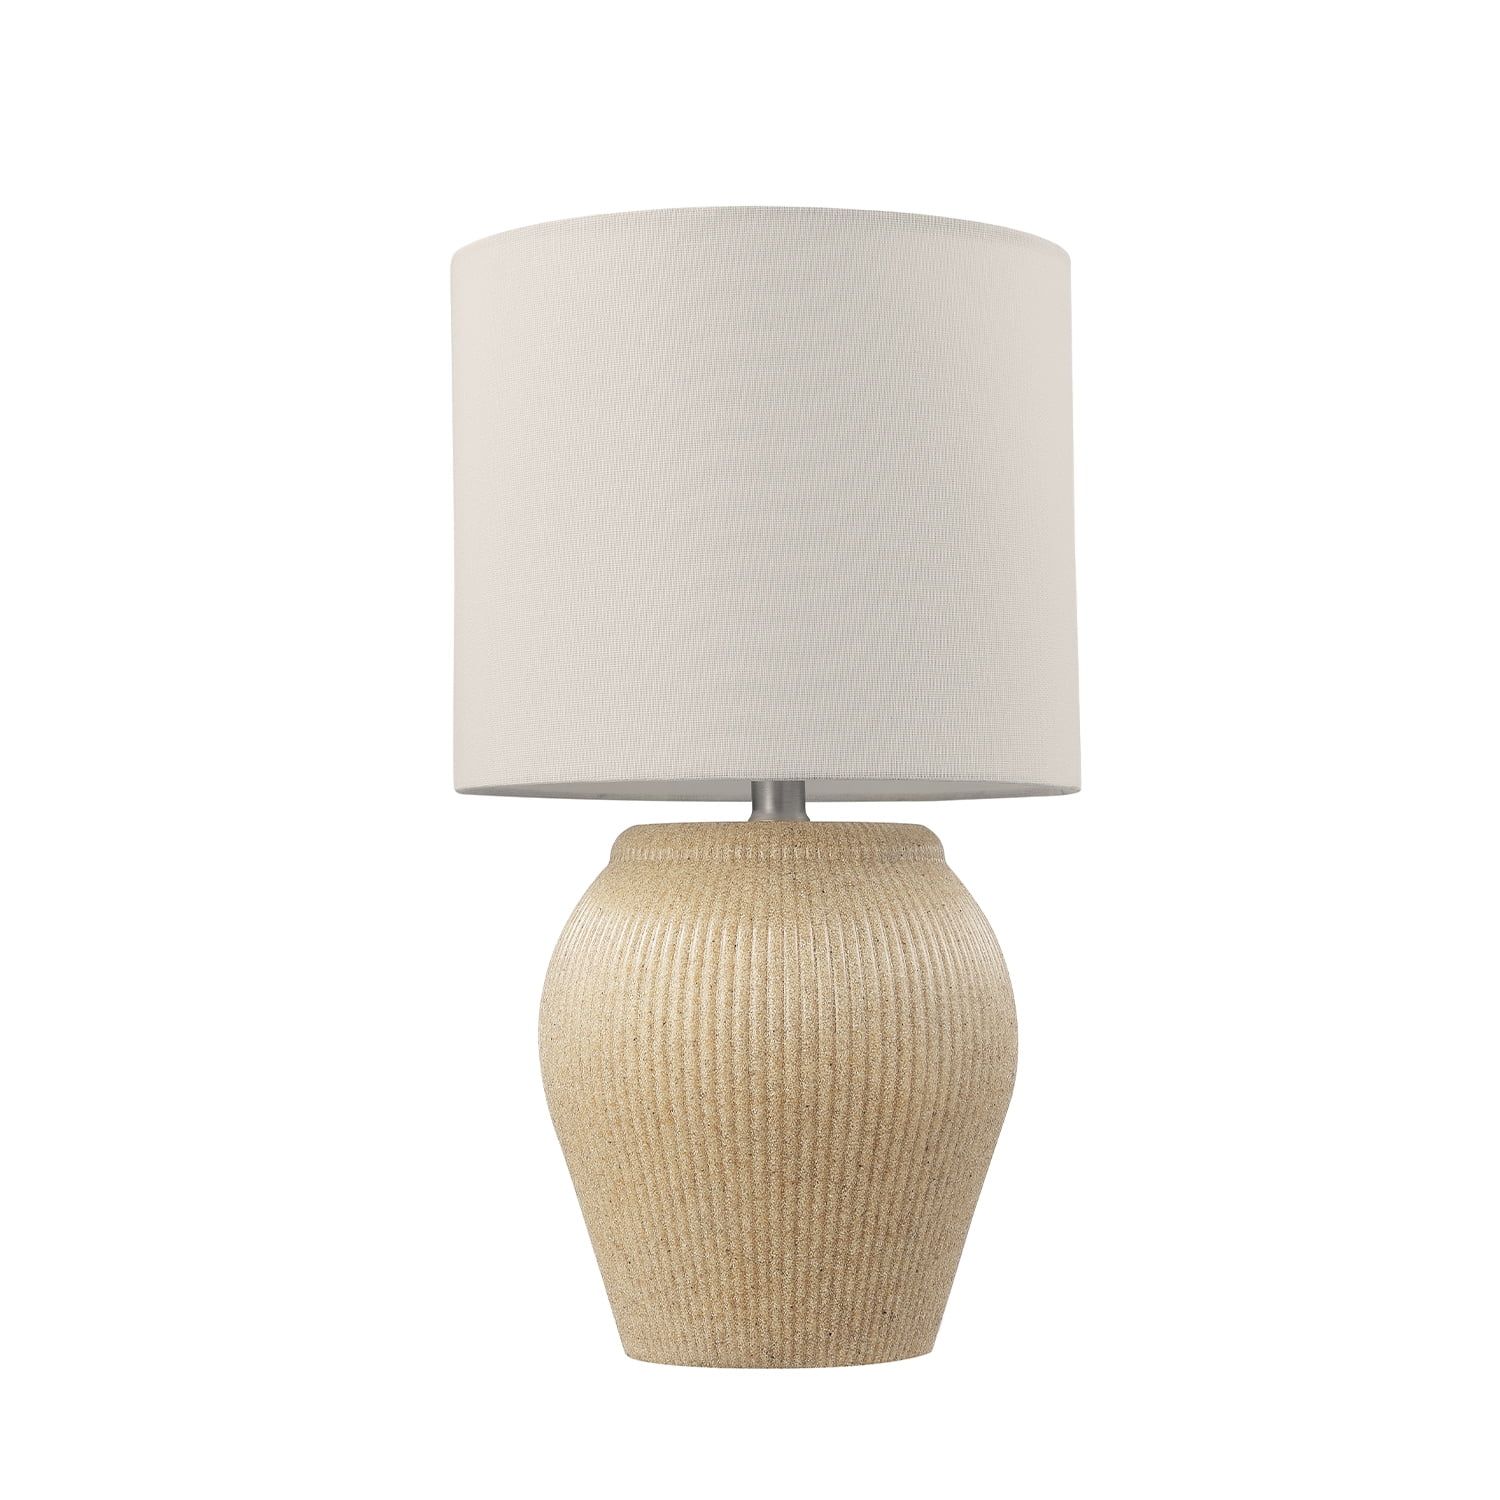 Globe Electric 17" Soft Beige Ceramic Table Lamp with White Linen Shade, 91006232 | Walmart (US)